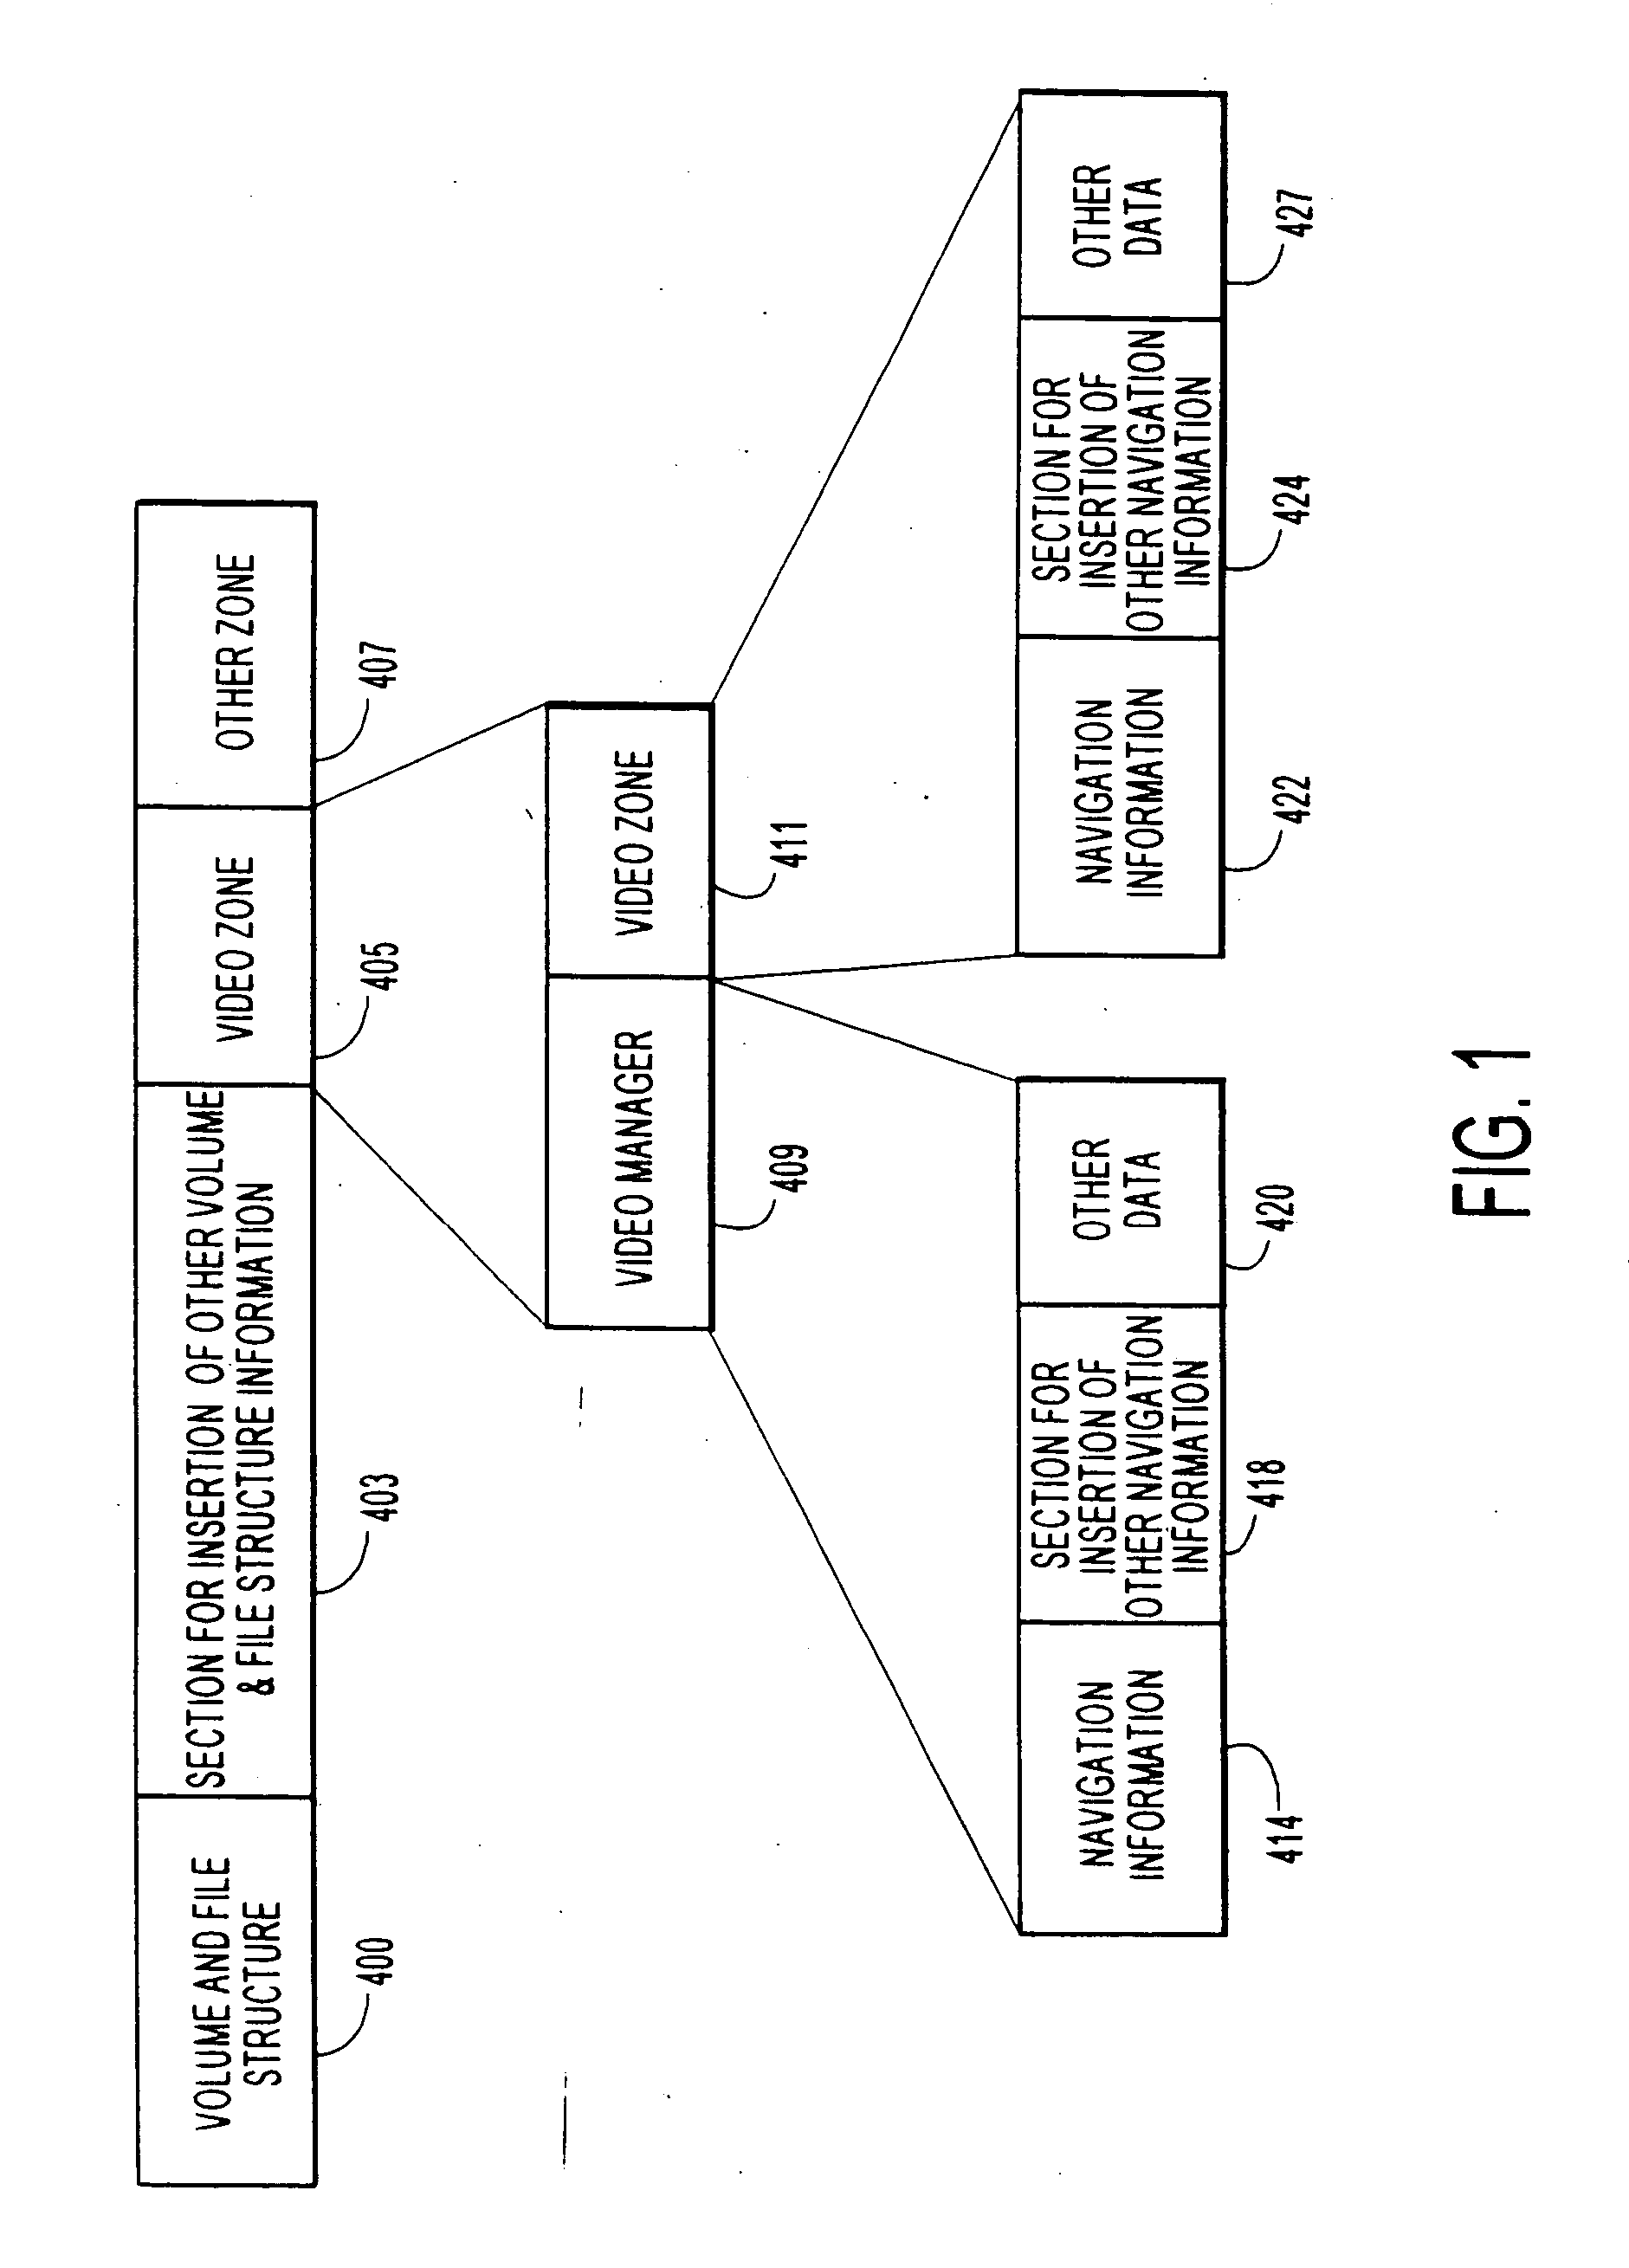 Digital video processing and storage system for video, audio and ancillary data